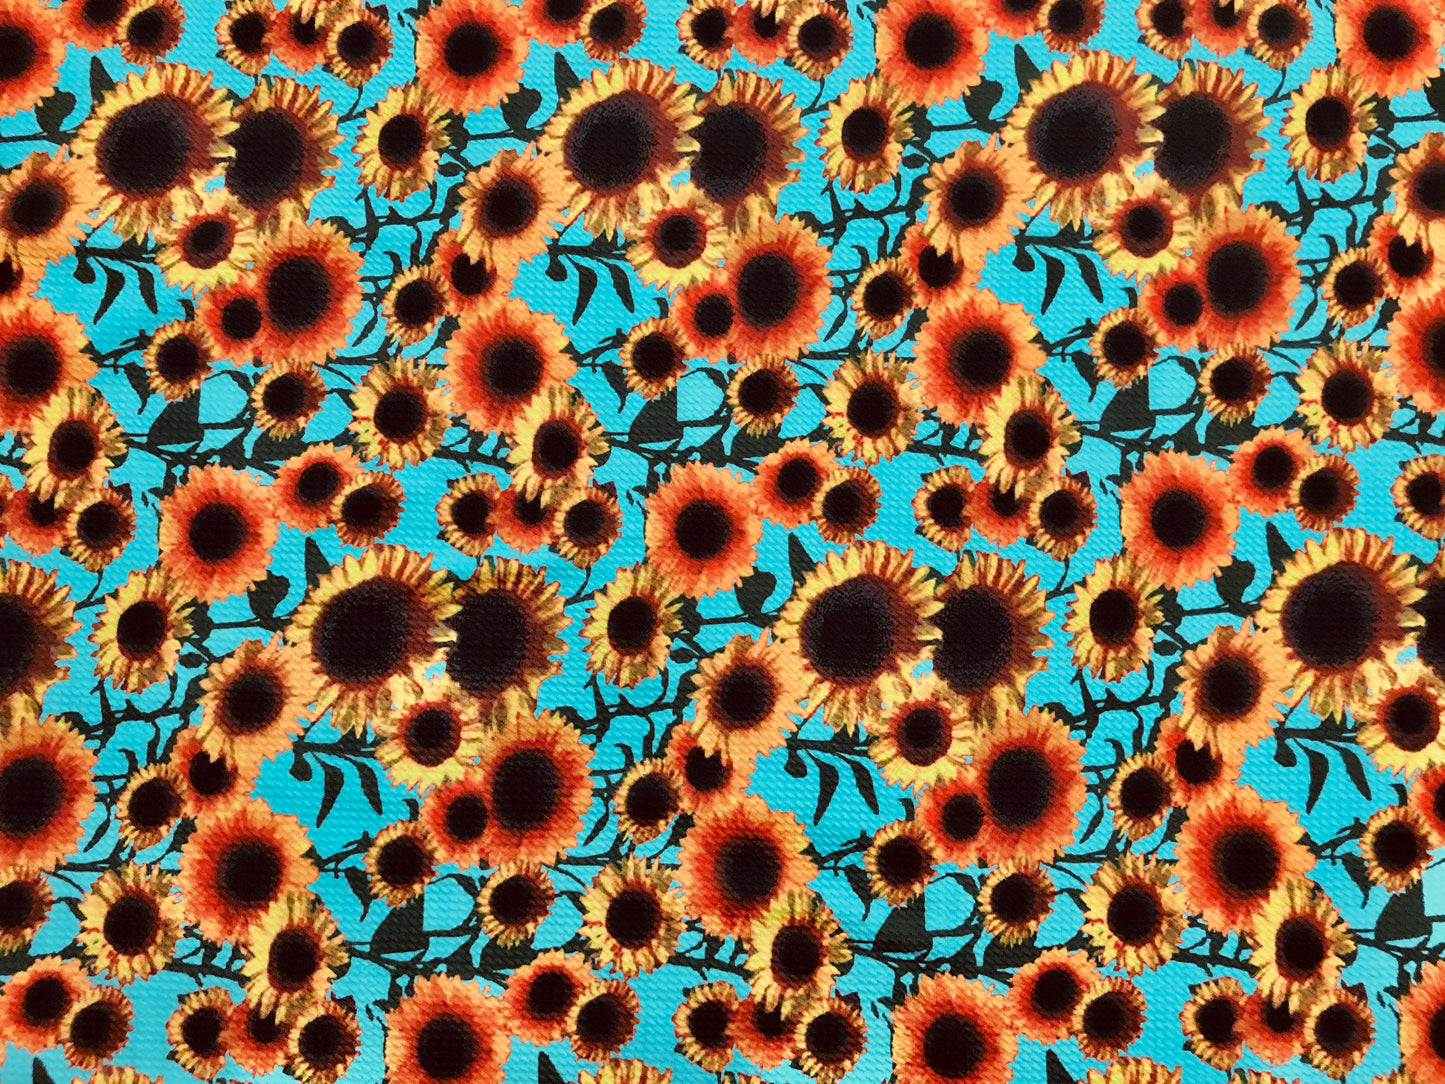 Bullet Knit Printed Fabric-Mint Orange Sunflowers-BPR212-Sold by the Yard